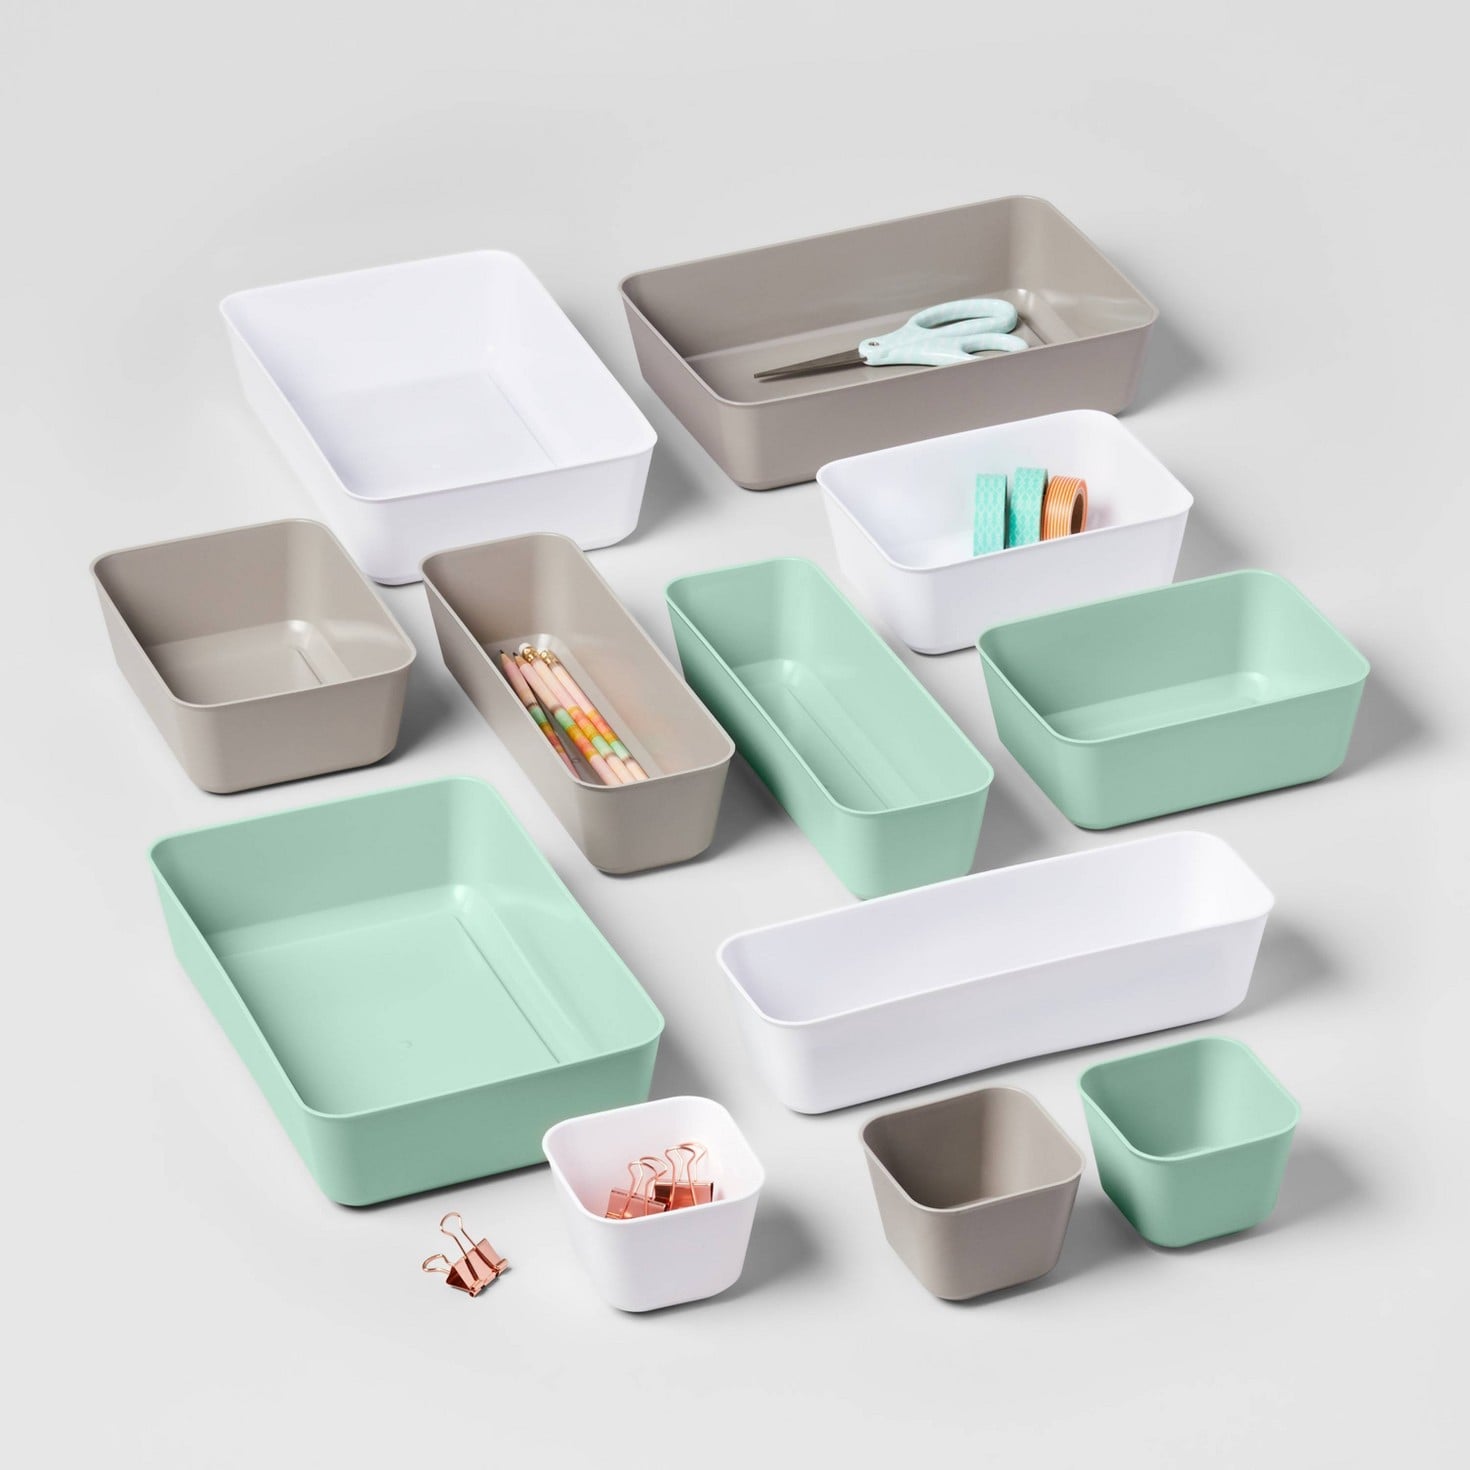 Target Just Launched Brightroom, a New Home Organization Brand to